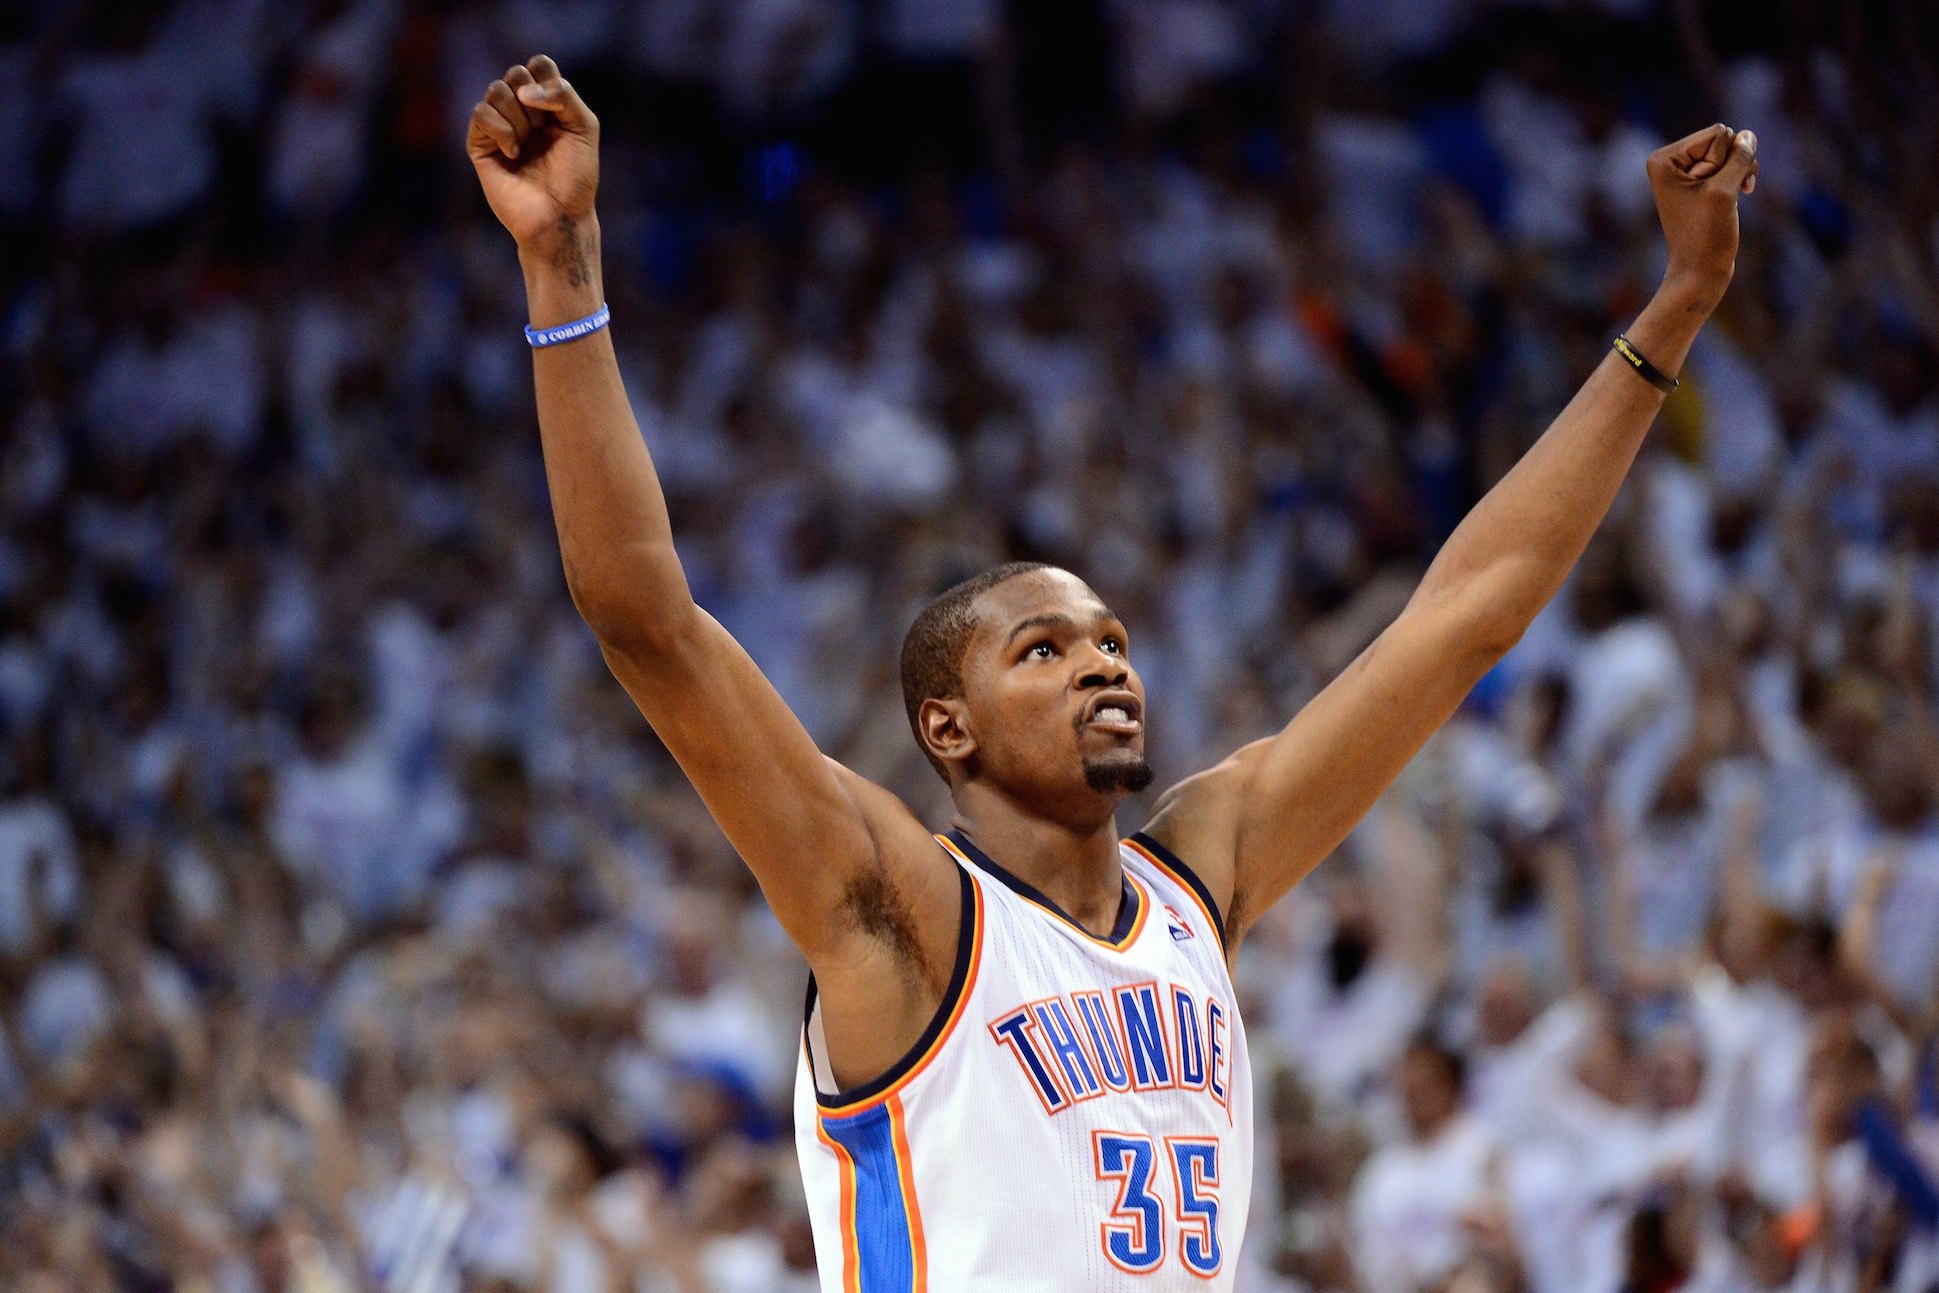 Kevin Durant of Oklahoma City Thunder wins MVP award for first time - ESPN